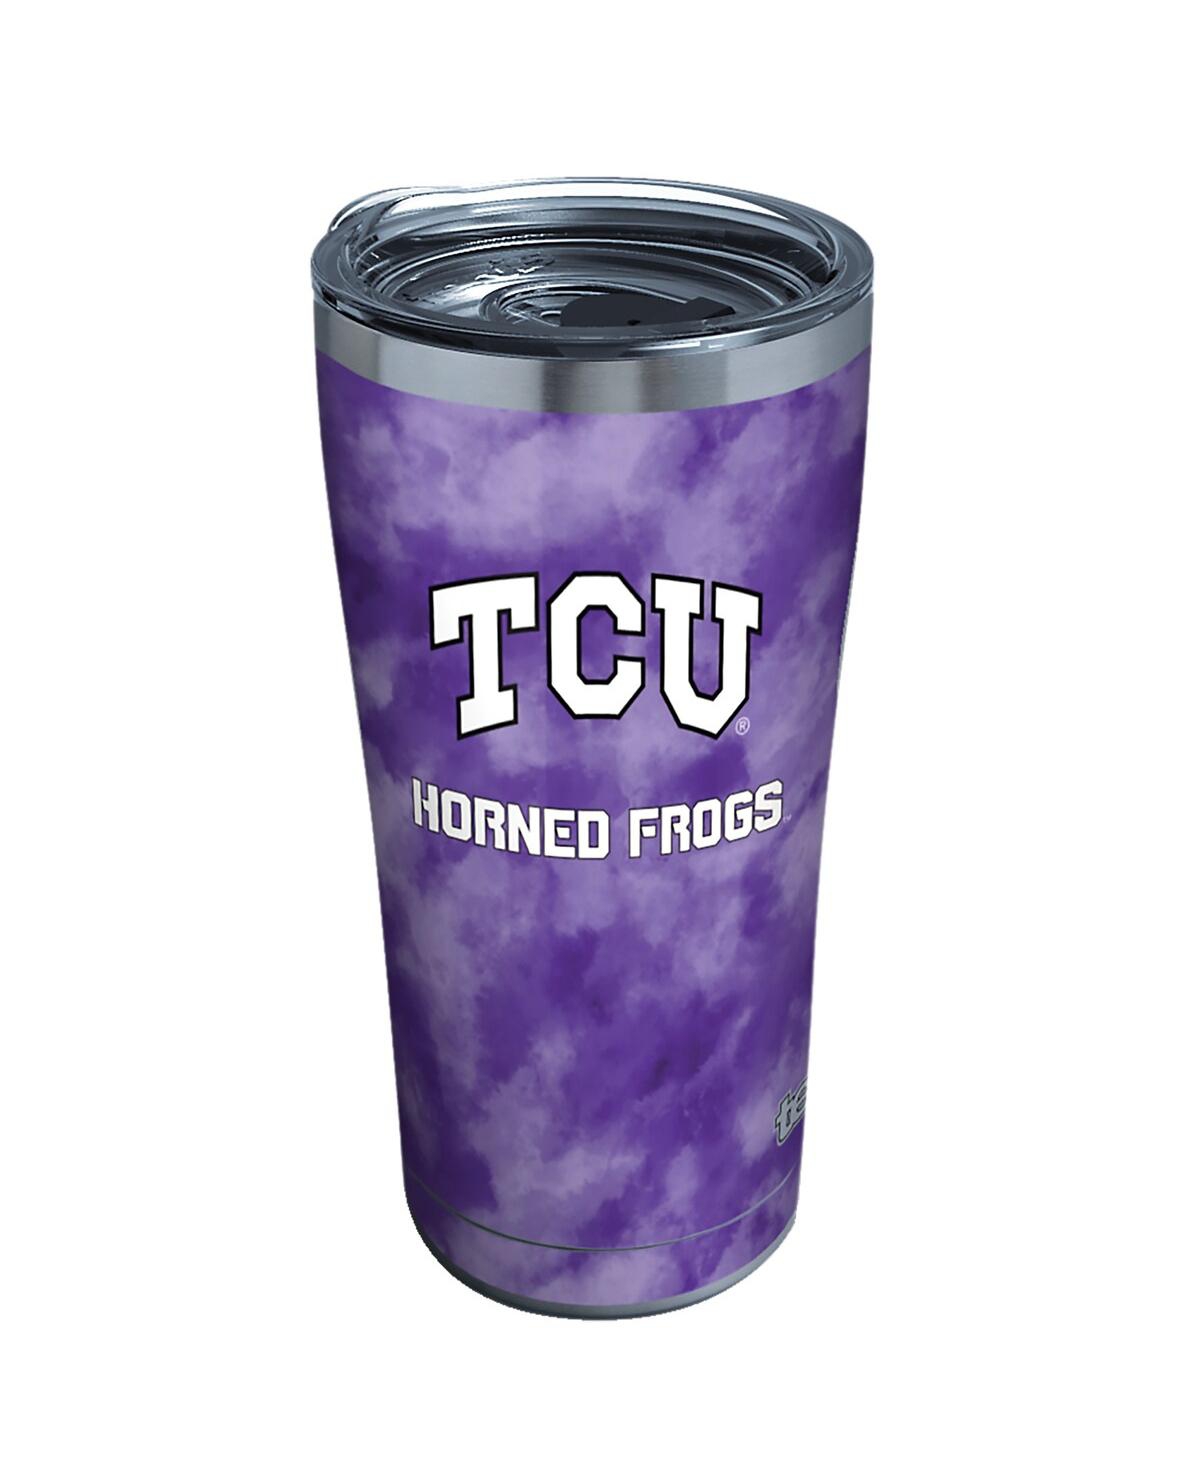 Tervis Tumbler Tcu Horned Frogs 20oz. Tie-dye Stainless Steel Tumbler In No Color